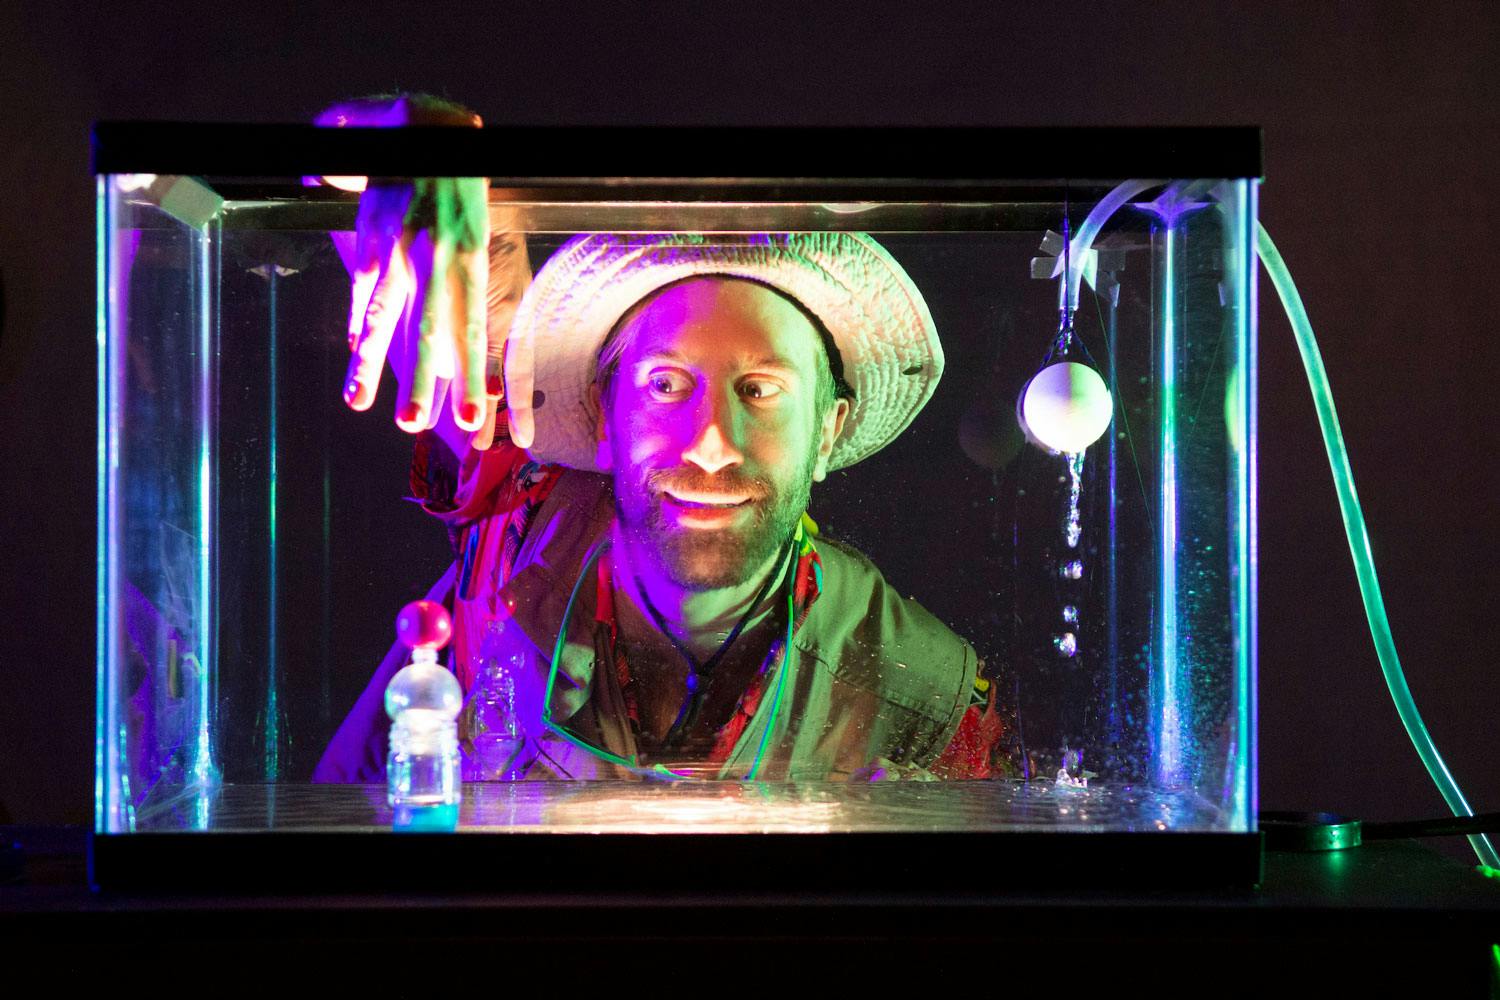 A white man wearing a wide-brimmed hat and green vest reaches his fingers into a glass box. He is lit with pink and green light.